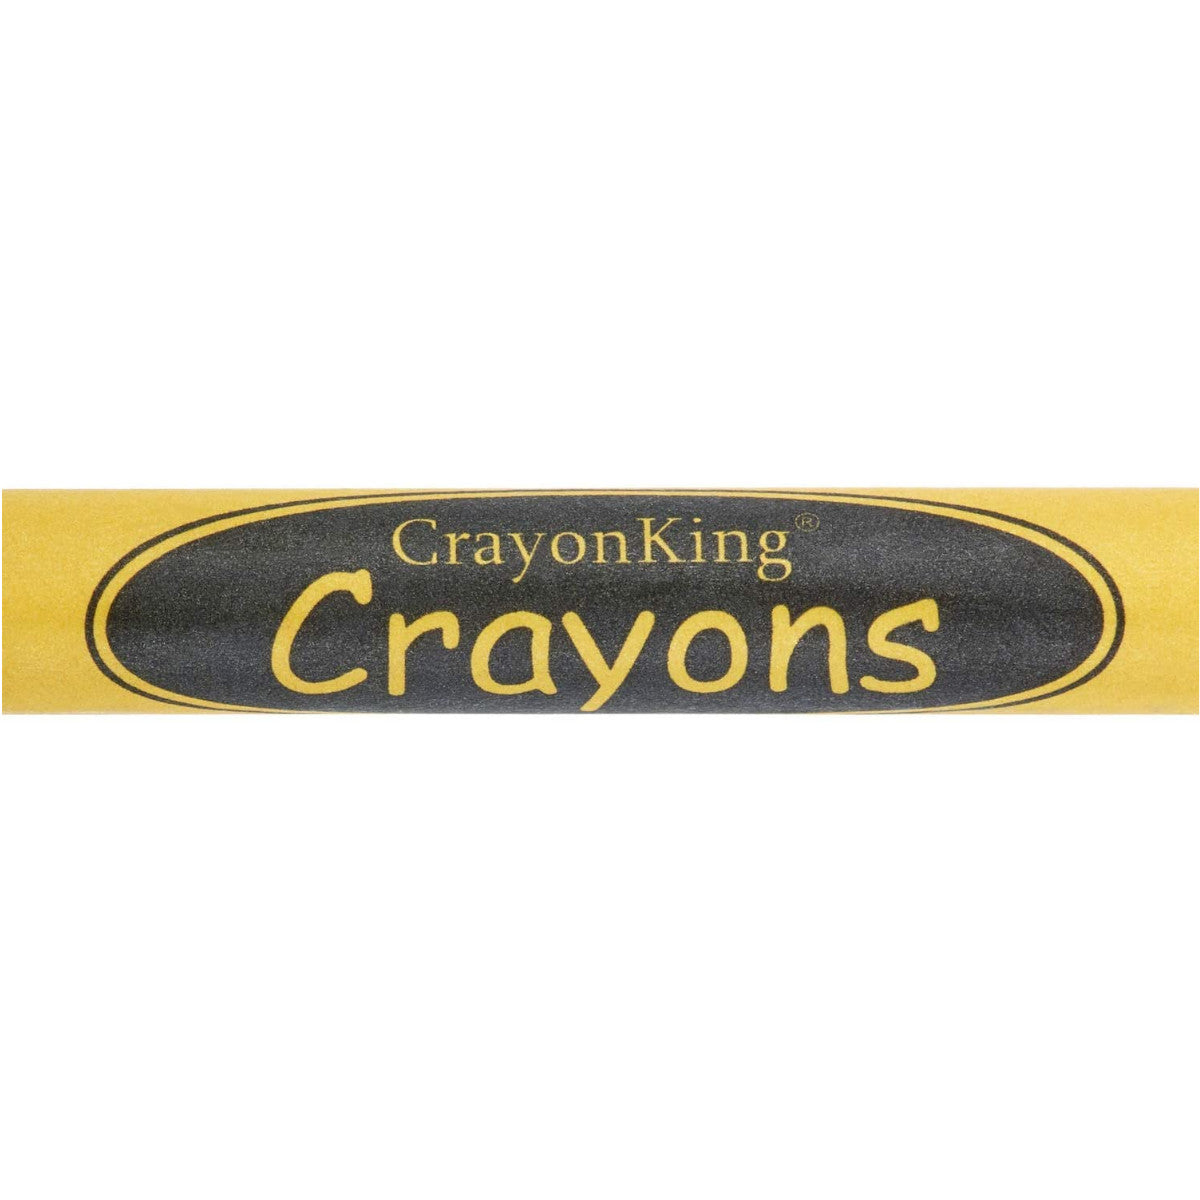 Photo showing the CrayonKing logo and the word crayons.